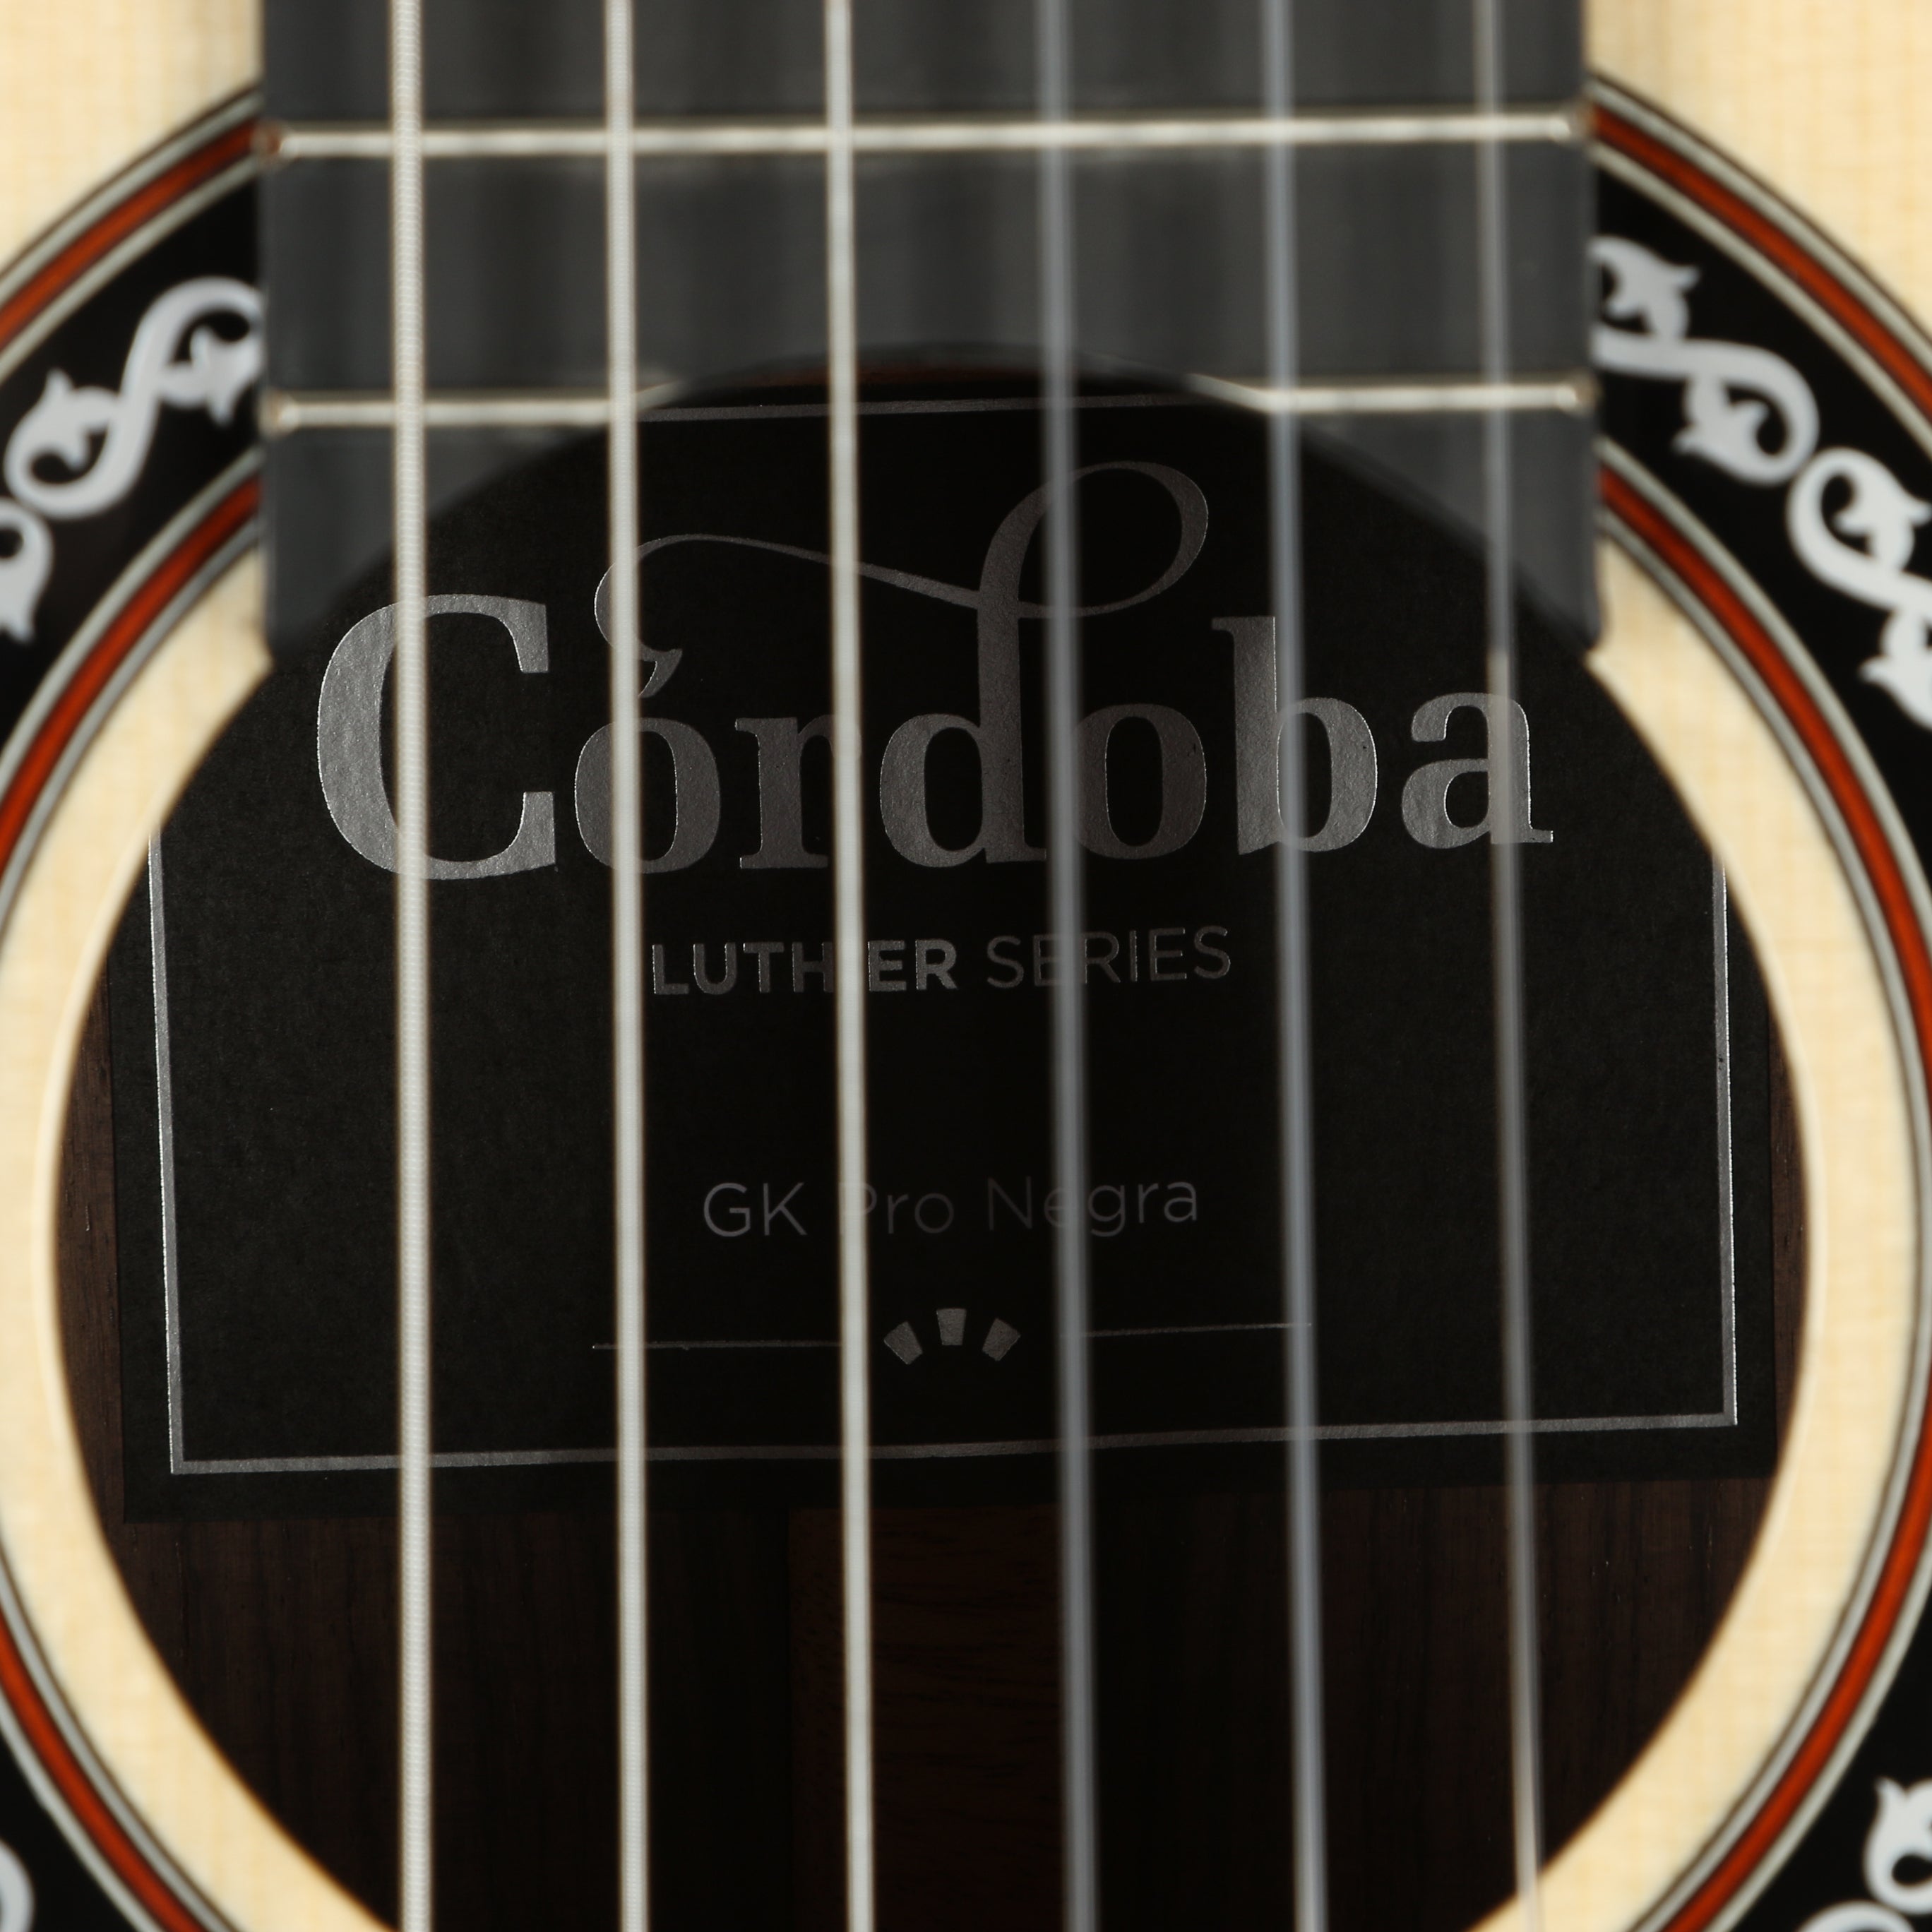 Cordoba GK Pro Negra Luthier All Solid Top